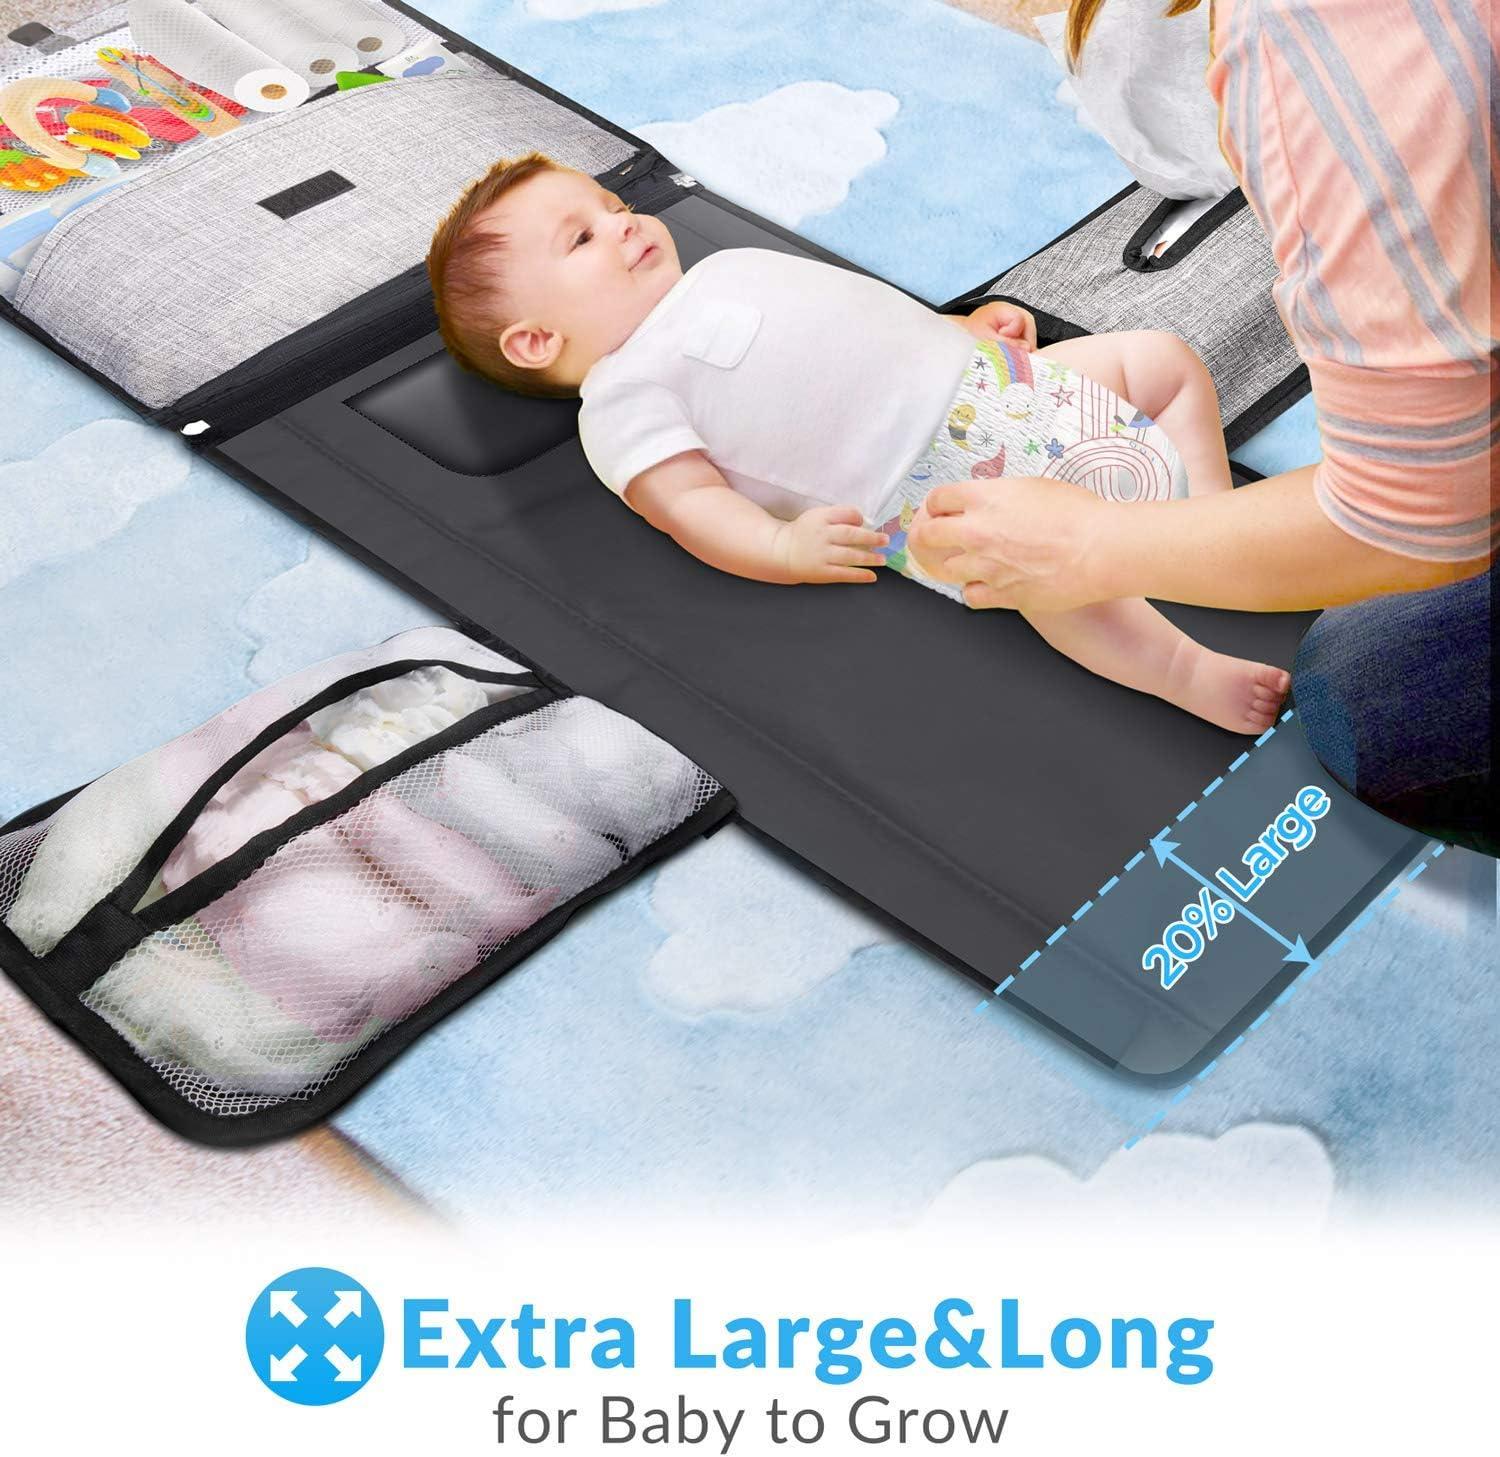 Portable Diaper Changing Pad with Built-in Head Cushion Infant Diaper Bag  Multi-function Baby cambiador